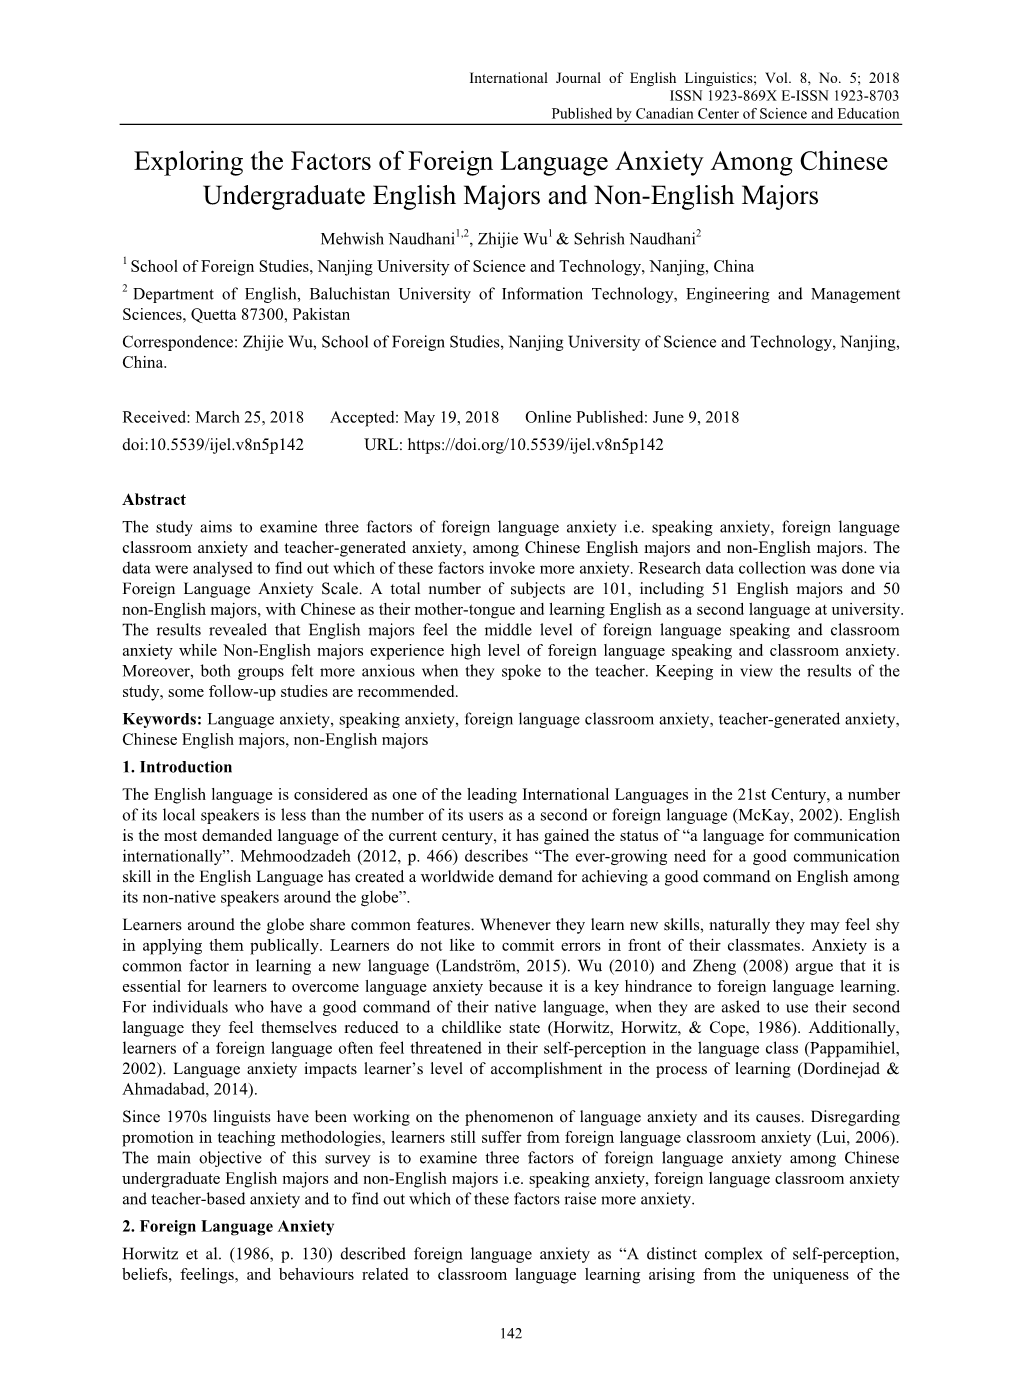 Exploring the Factors of Foreign Language Anxiety Among Chinese Undergraduate English Majors and Non-English Majors